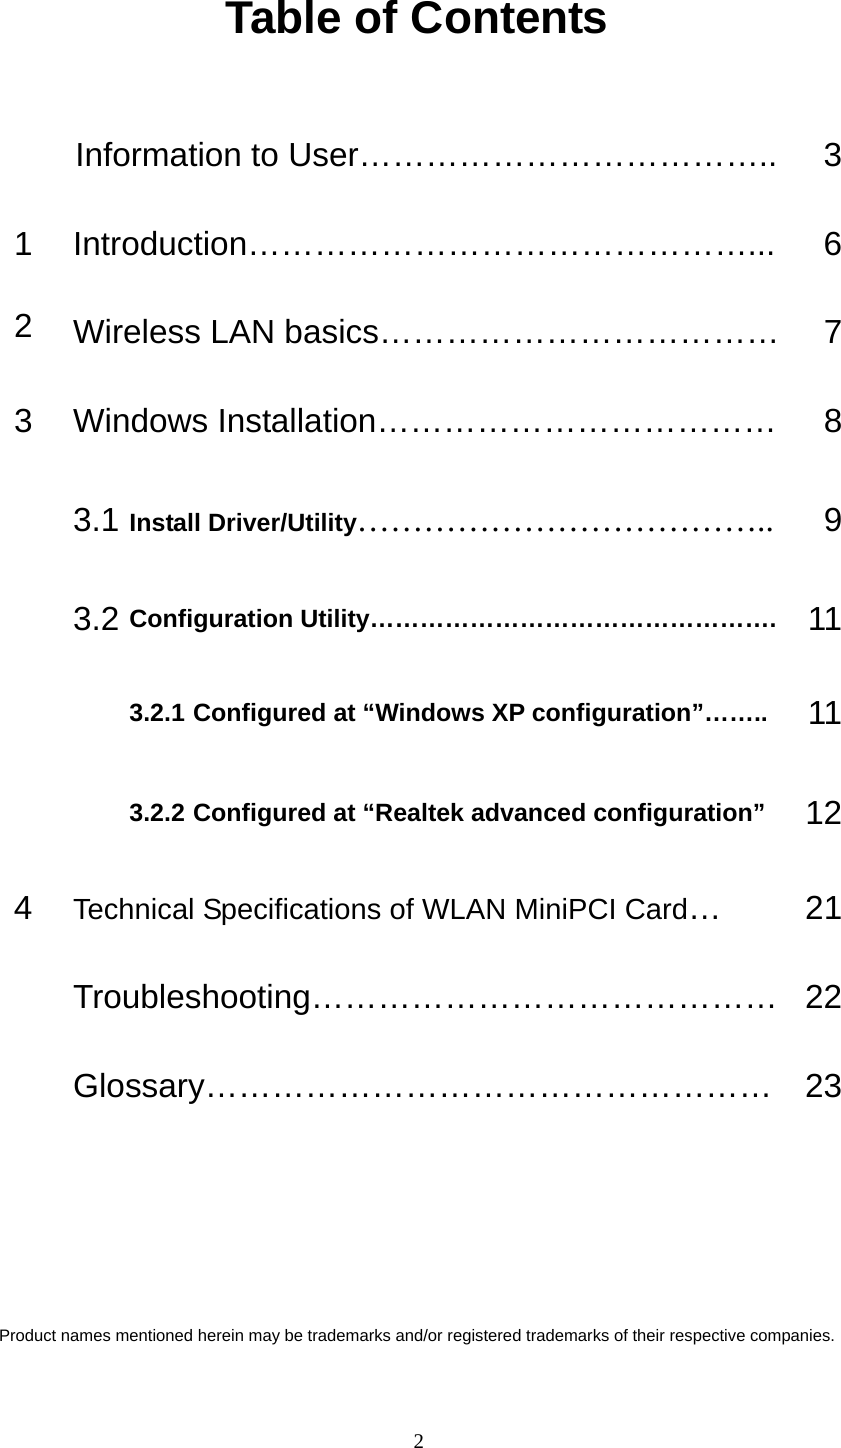   2 Table of Contents  Information to User………………………………..  31 Introduction………………………………………...  62  Wireless LAN basics………………………………    73  Windows Installation………………………………  8 3.1 Install Driver/Utility……………………………….. 9 3.2 Configuration Utility………………………………………….  113.2.1 Configured at “Windows XP configuration”……..  11  3.2.2 Configured at “Realtek advanced configuration”  124  Technical Specifications of WLAN MiniPCI Card… 21 Troubleshooting…………………………………… 22 Glossary…………………………………………… 23     Product names mentioned herein may be trademarks and/or registered trademarks of their respective companies. 